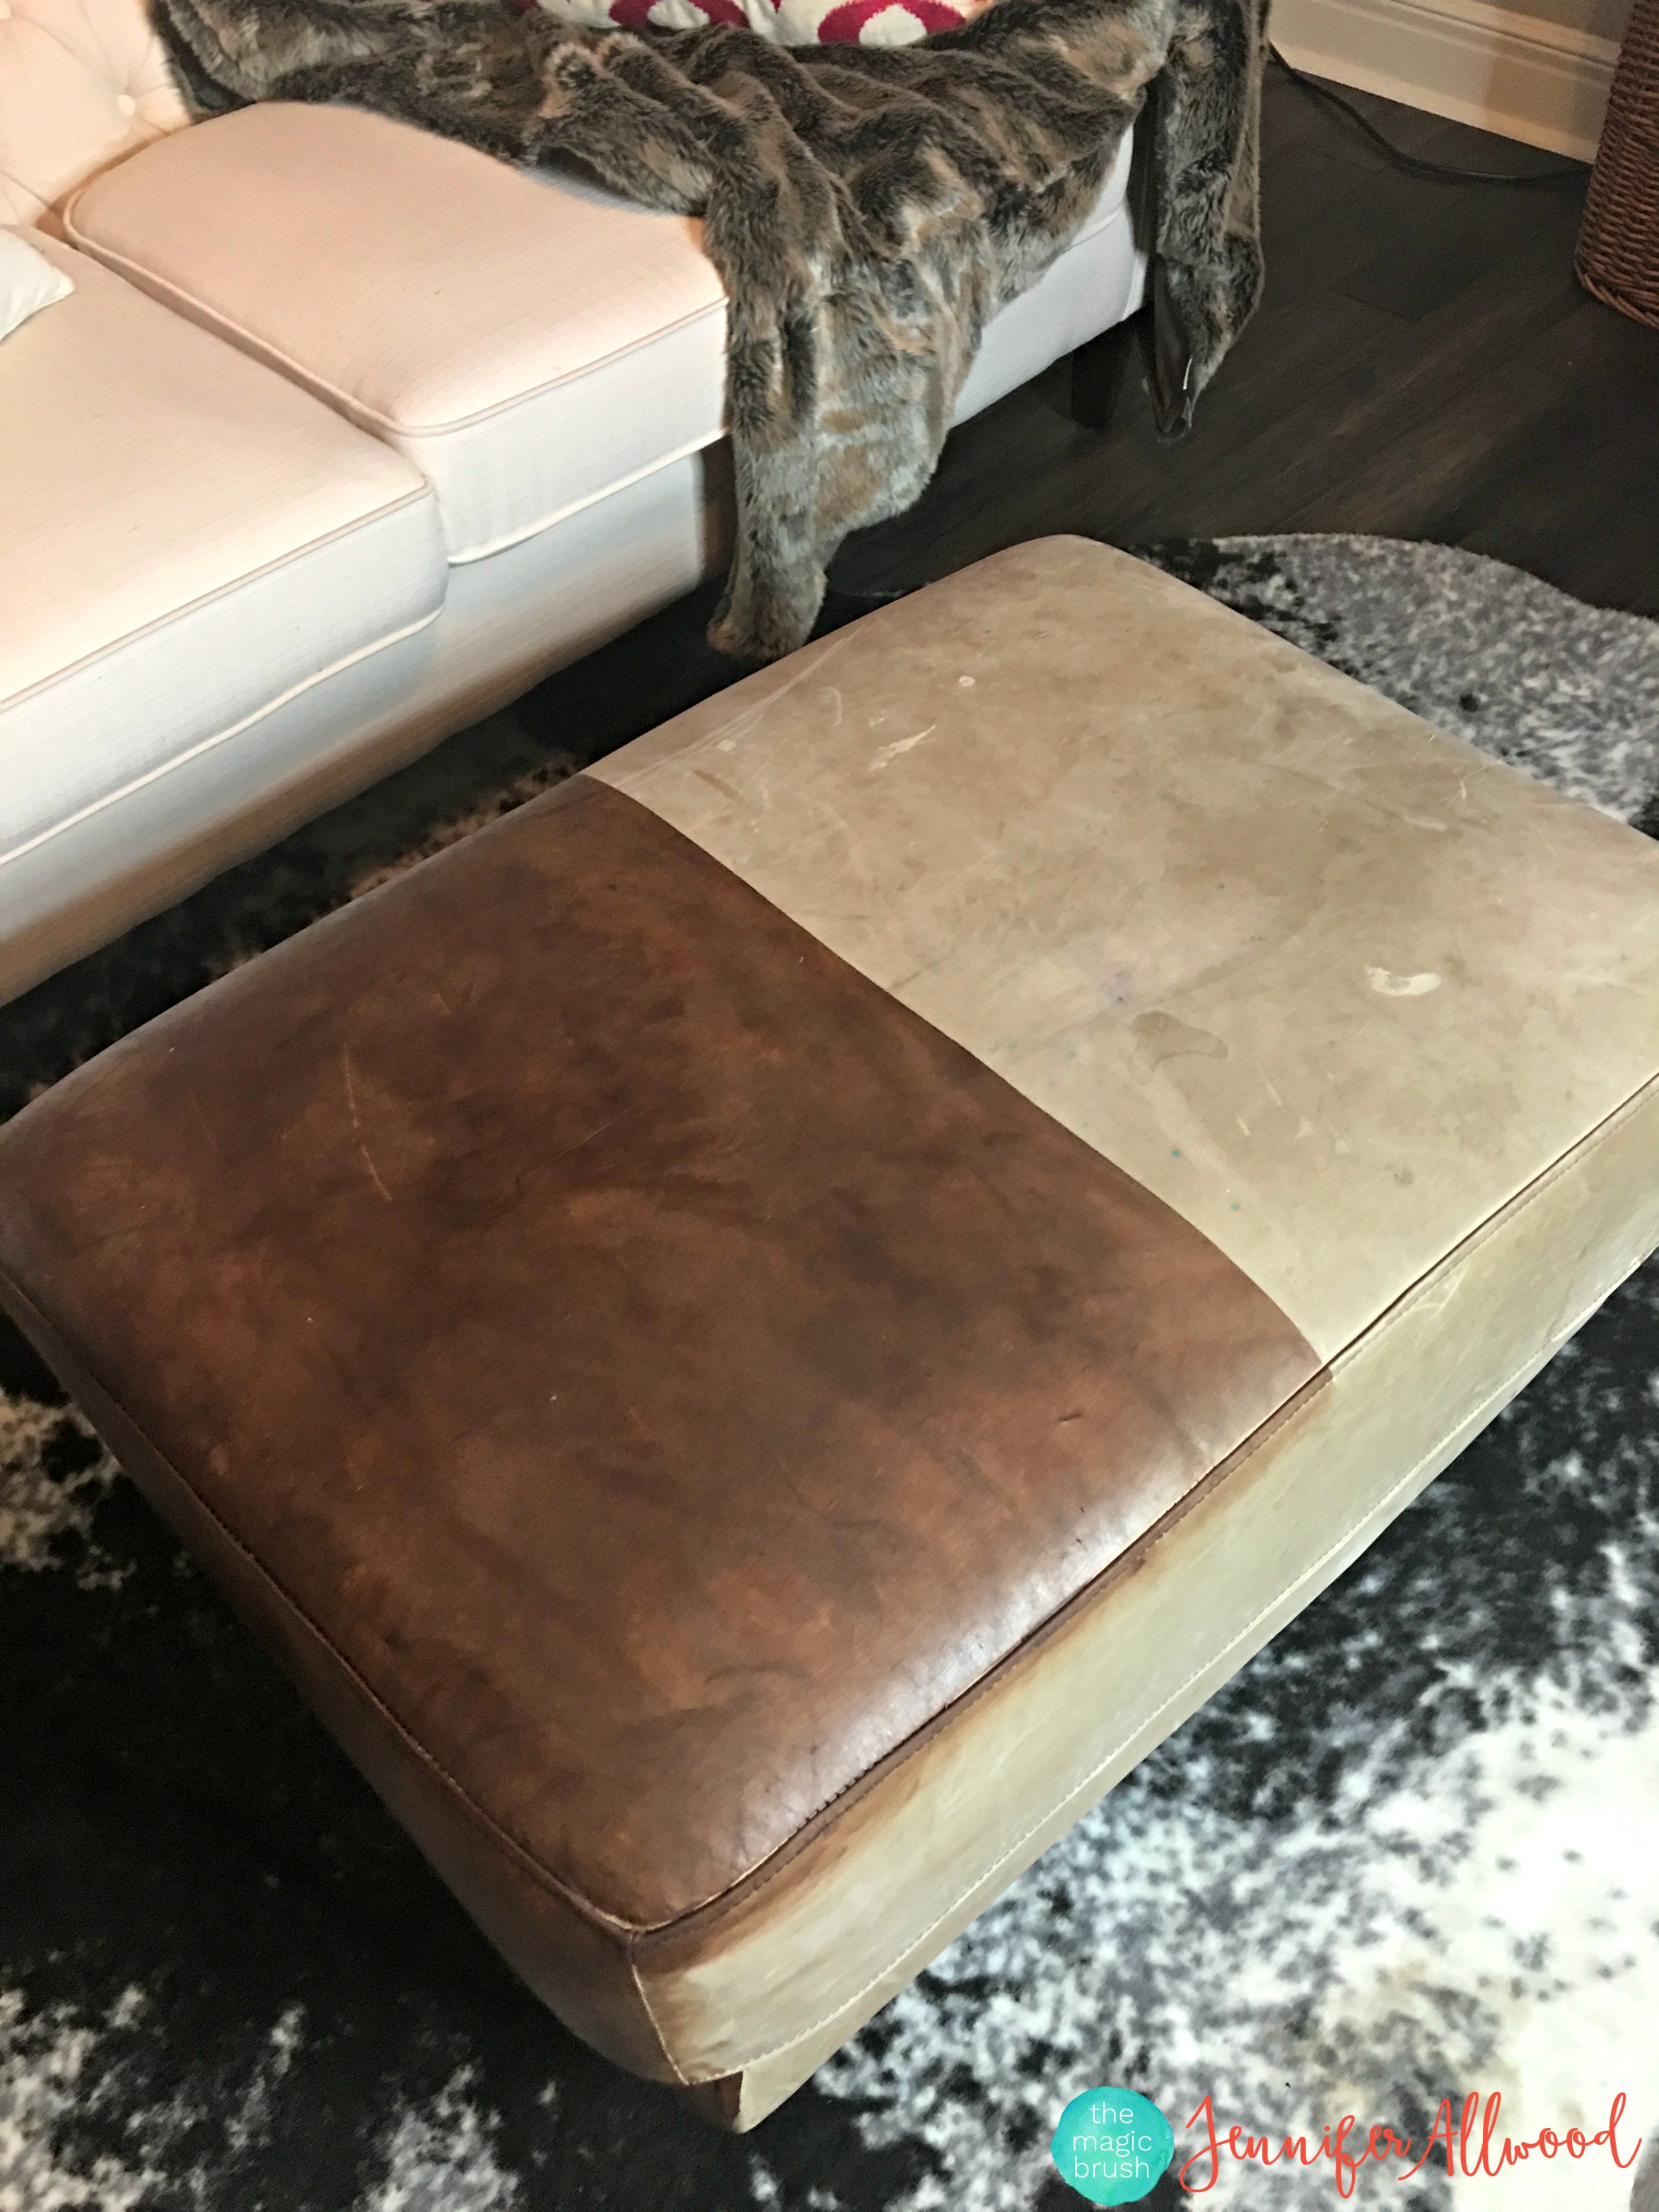 Leather Paint for Furniture - Popular Options and Uses